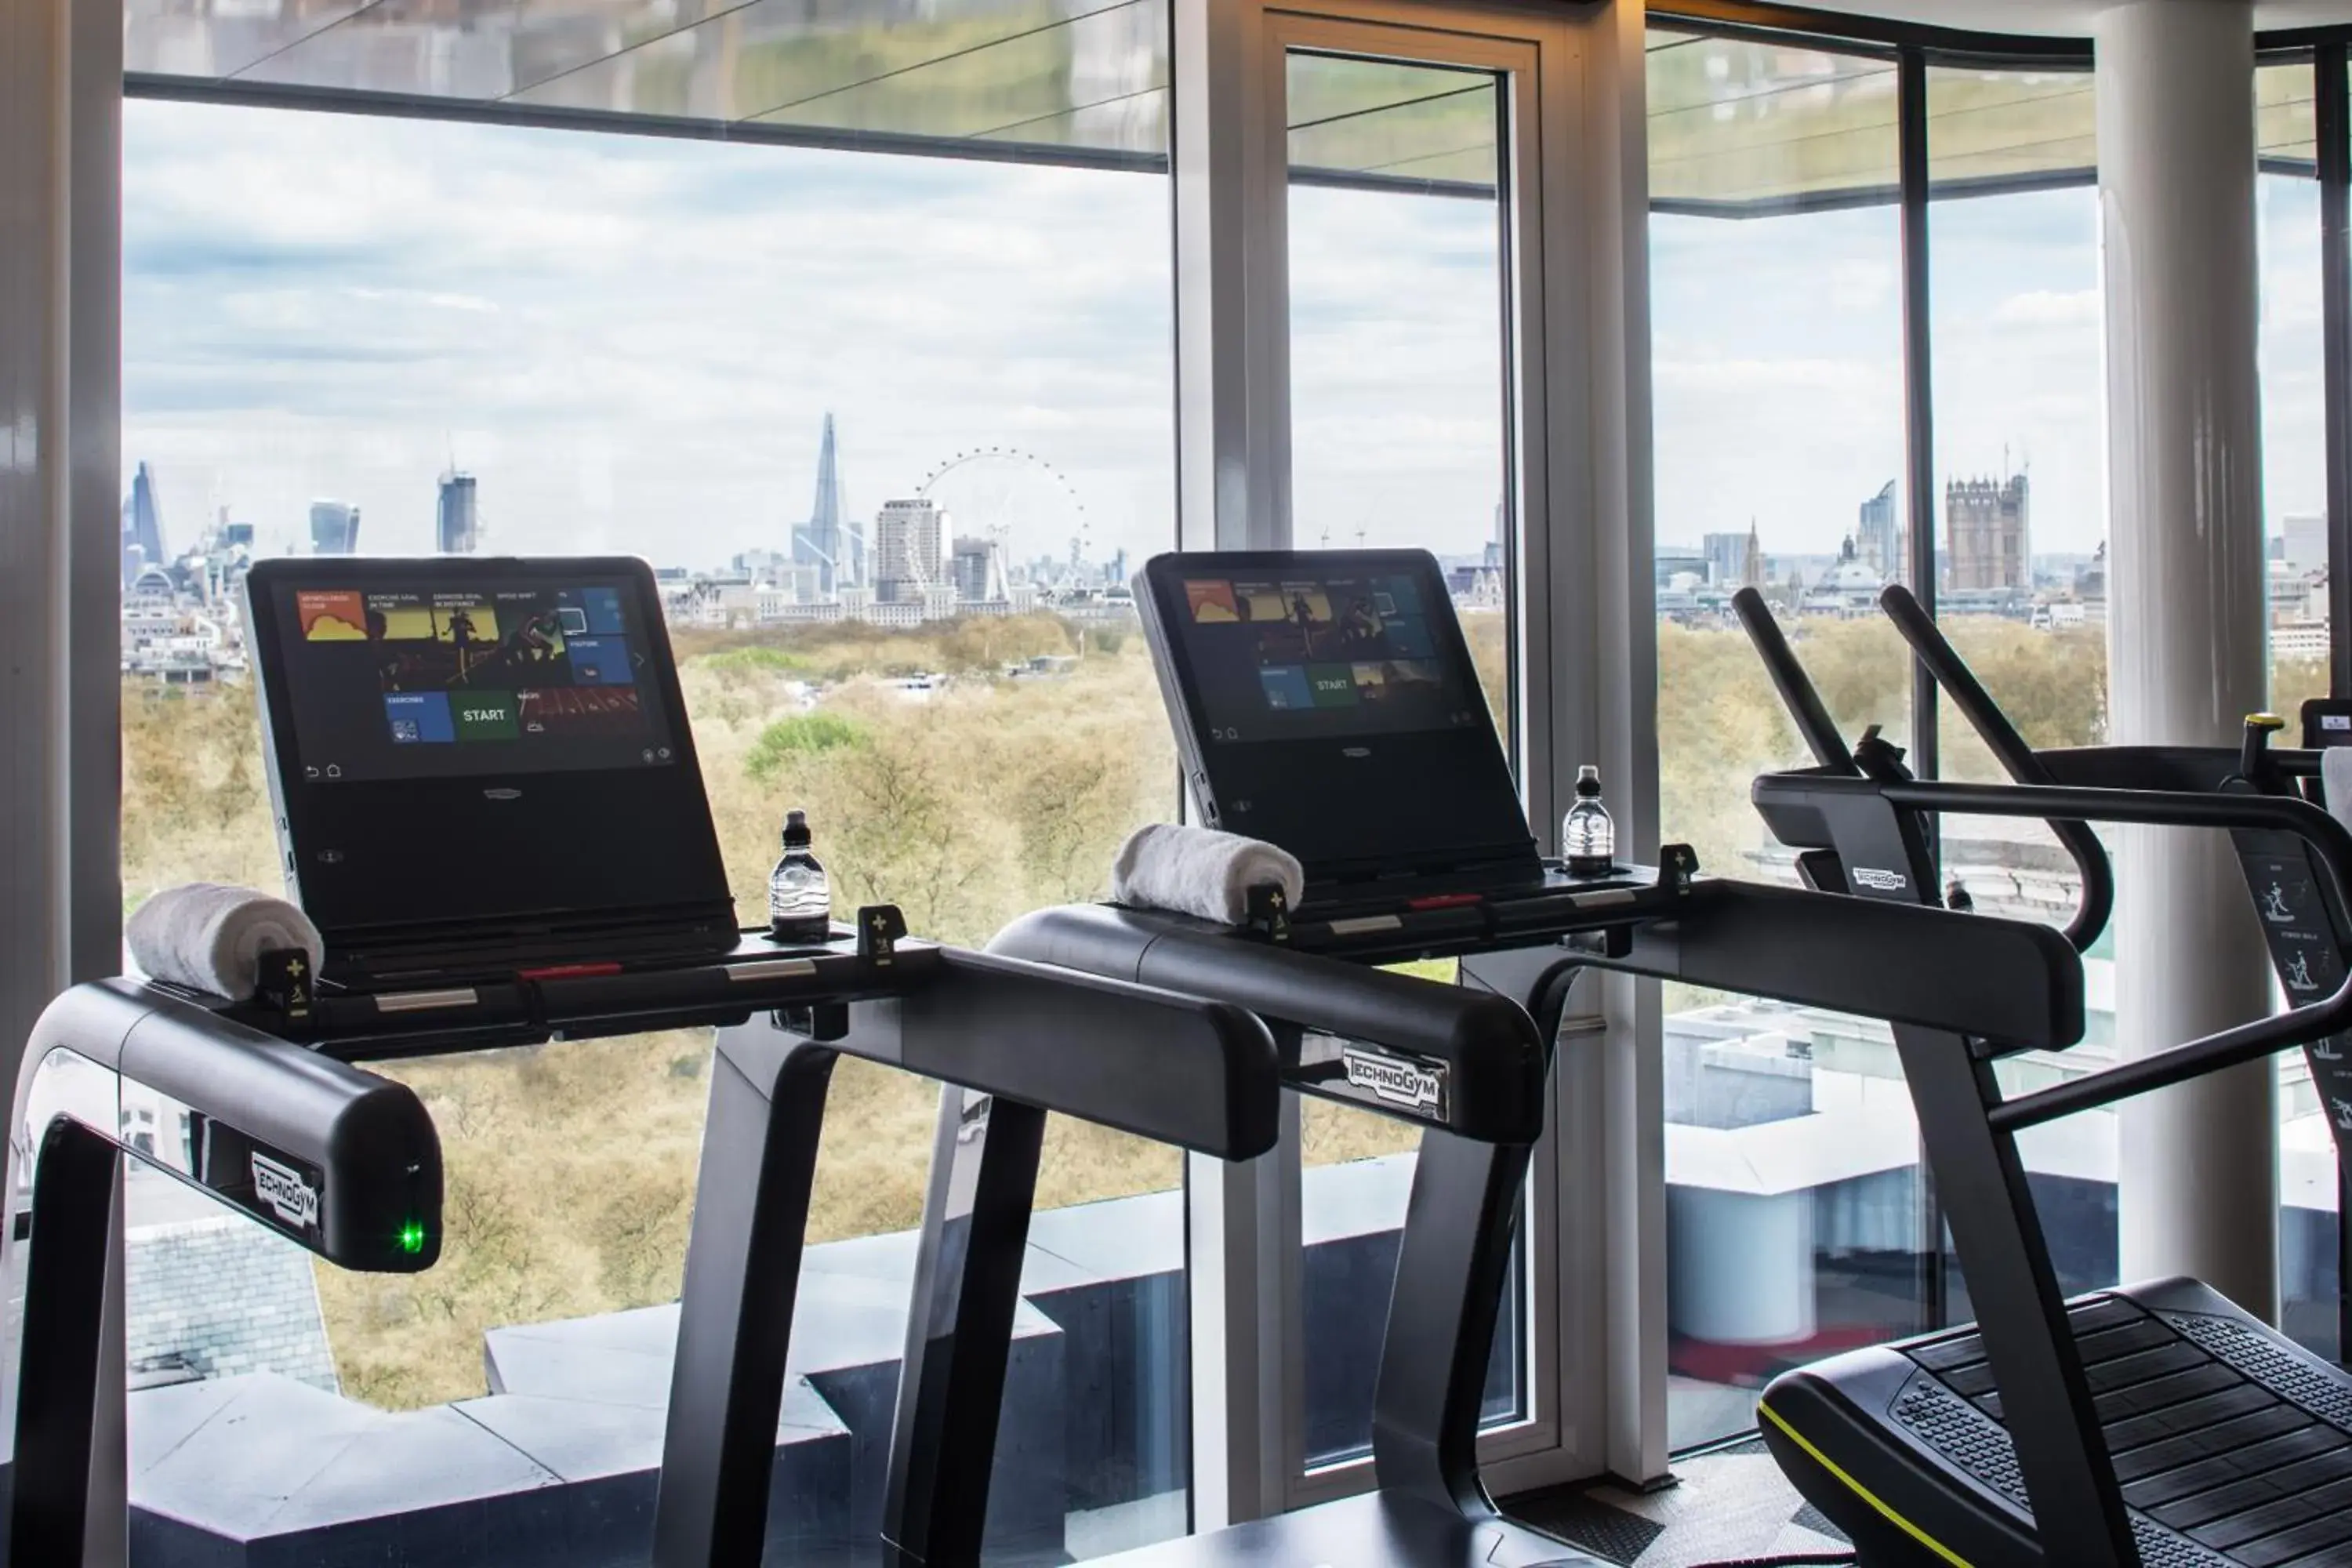 Fitness centre/facilities, Fitness Center/Facilities in Four Seasons Hotel London At Park Lane